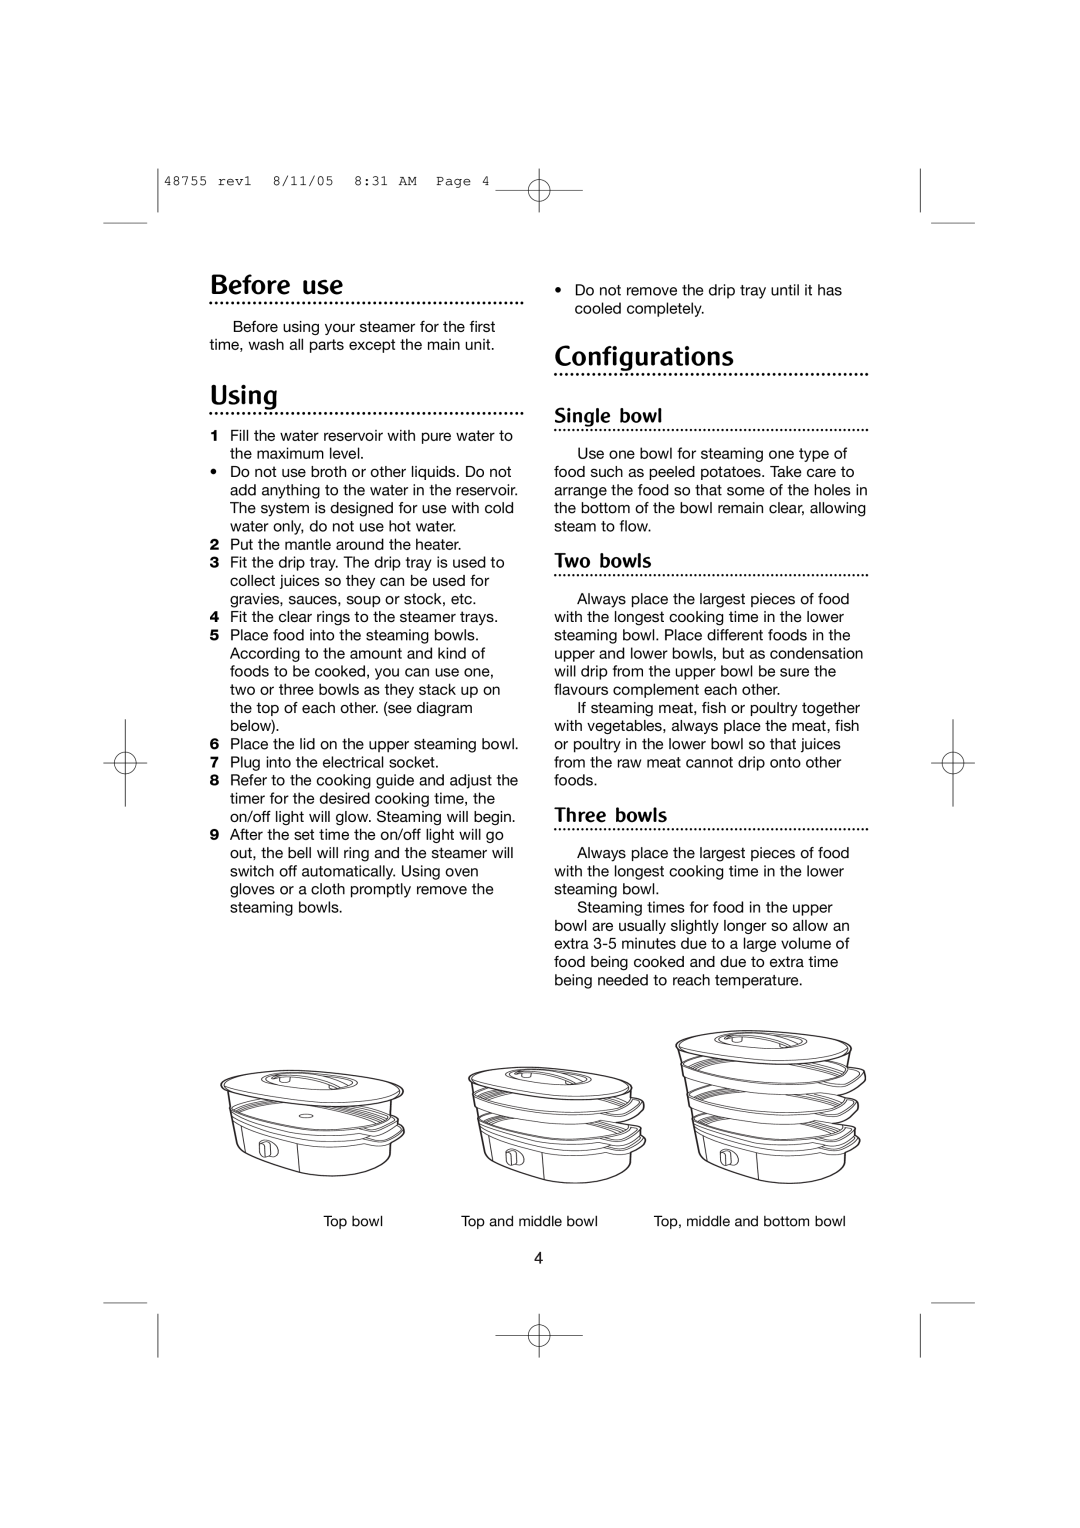 Morphy Richards Stainless steel steamer manual Before use, Using, Configurations, Single bowl, Two bowls, Three bowls 